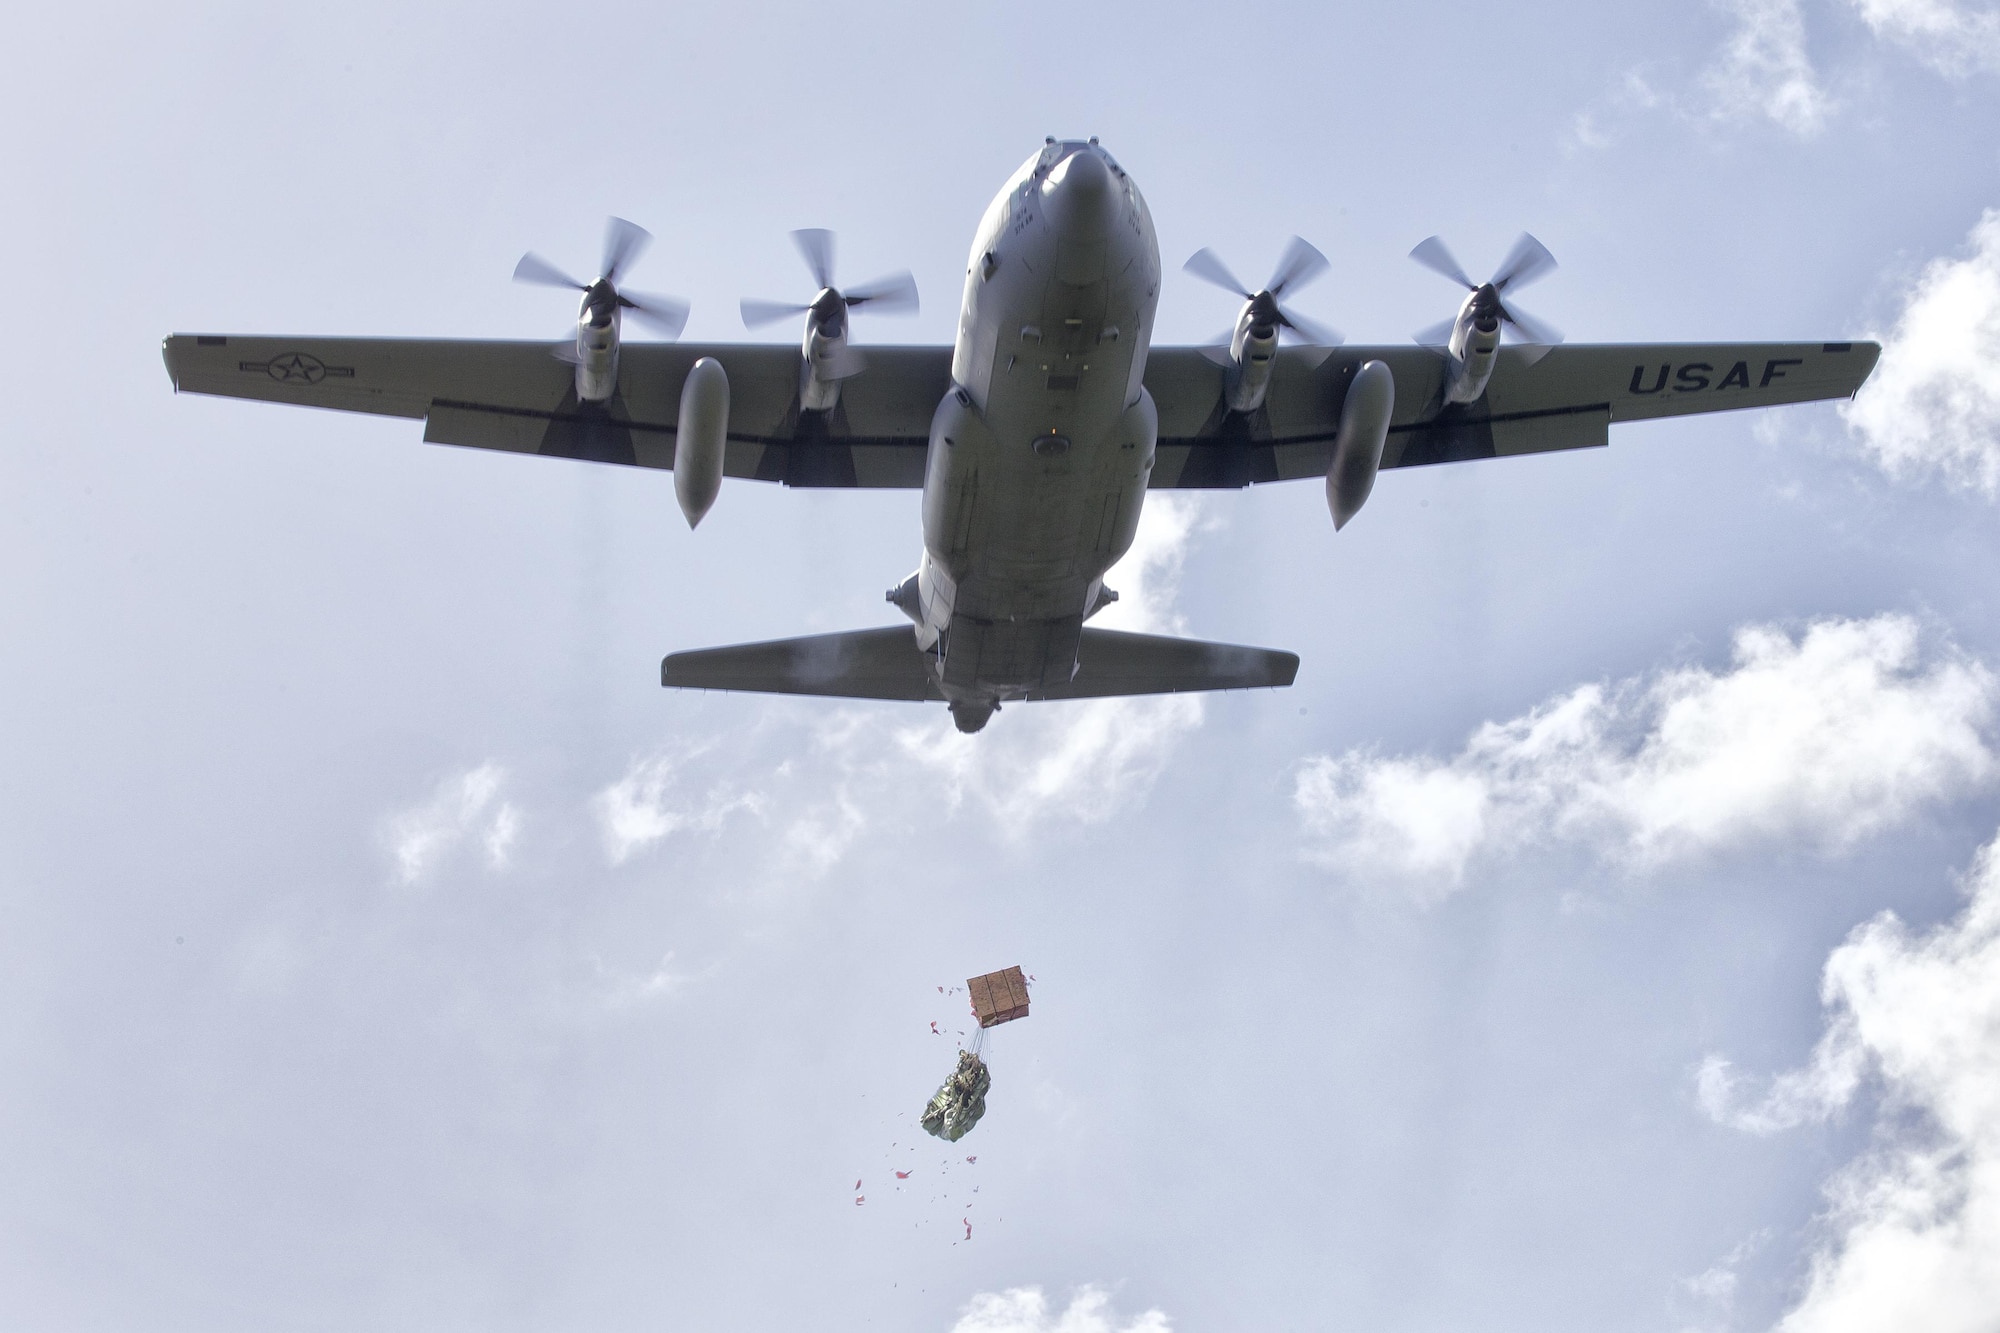 A C-130 Hercules assigned to the 36th Airlift Squadron drops a bundle filled with donated goods and supplies during Operation Christmas Drop 2015, at Fais Island, Federated States of Micronesia, Dec. 8, 2015. Airmen delivered over 800 pounds of supplies to the island of Fais during the drop. This year marks the first trilateral Operation Christmas Drop where the U.S. Air Force, Japan Air Self-Defense Force and the Royal Australian Air Force work together to provide critical supplies to 56 Micronesian islands impacting 20,000 islanders. (U.S. Air Force photo by Osakabe Yasuo/Released)